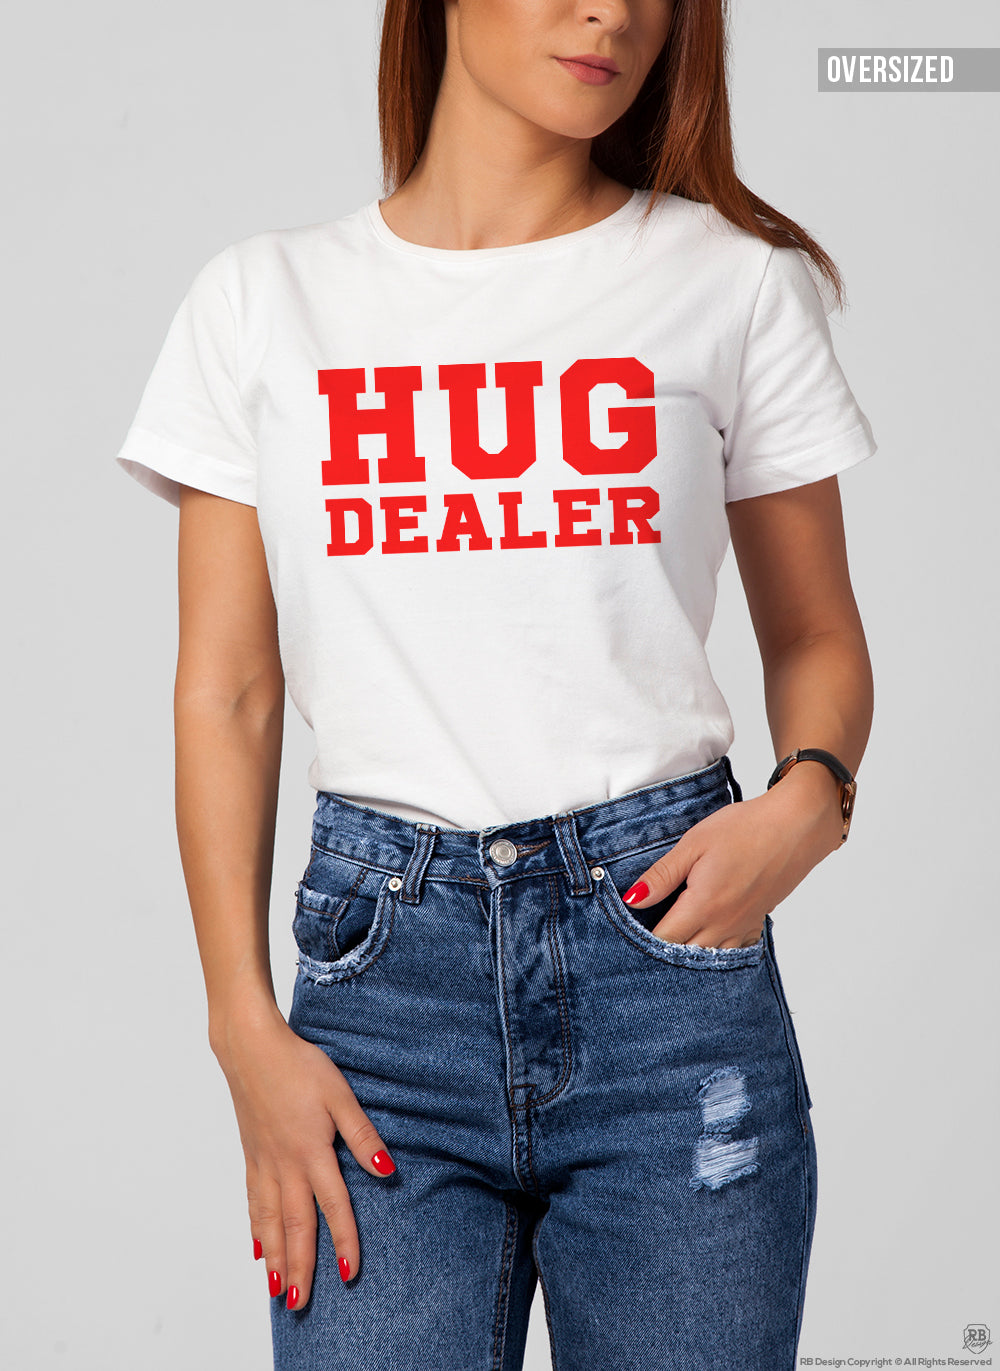 Women's T-shirt With Sayings "Hug Dealer" WTD17 Red